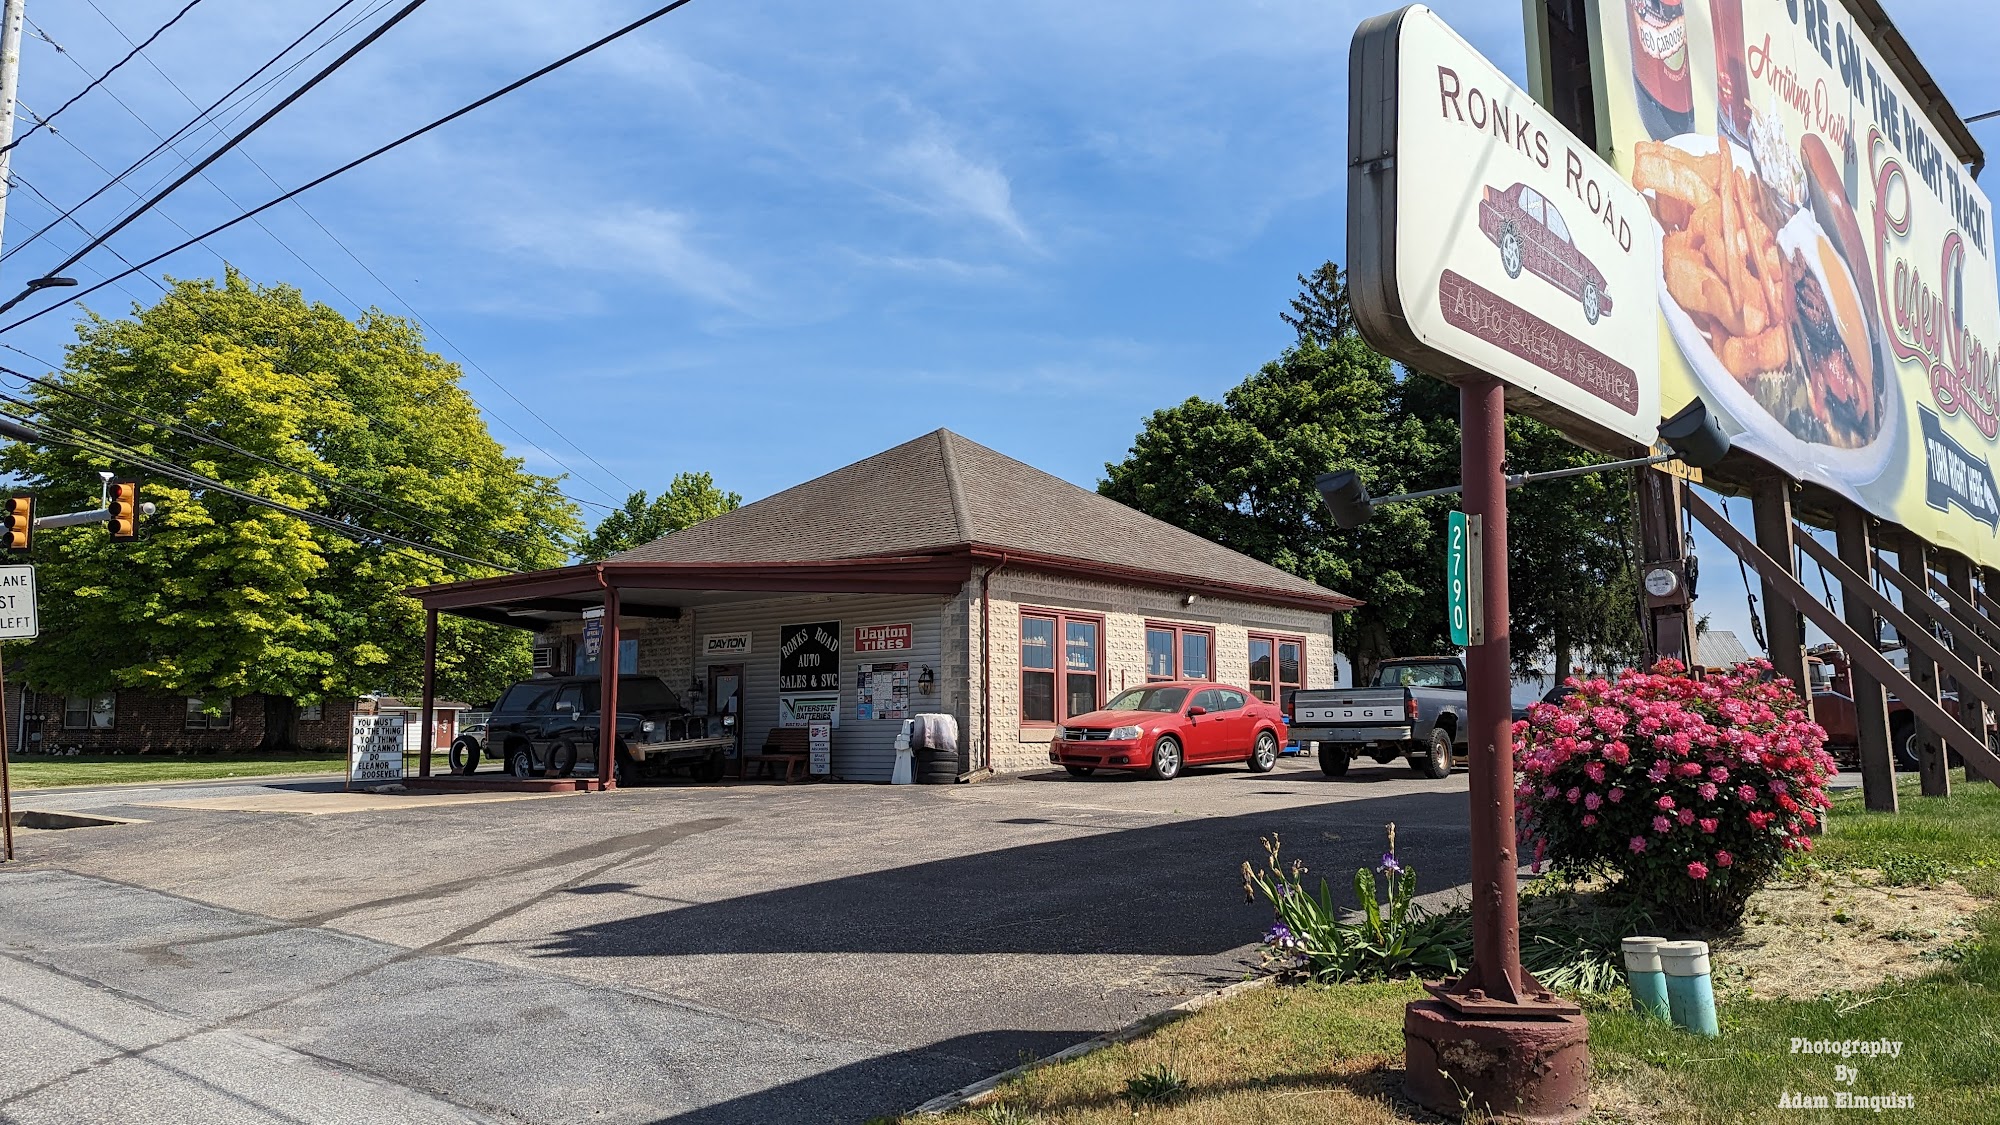 Ronks Road Auto Sales and Services, LLC